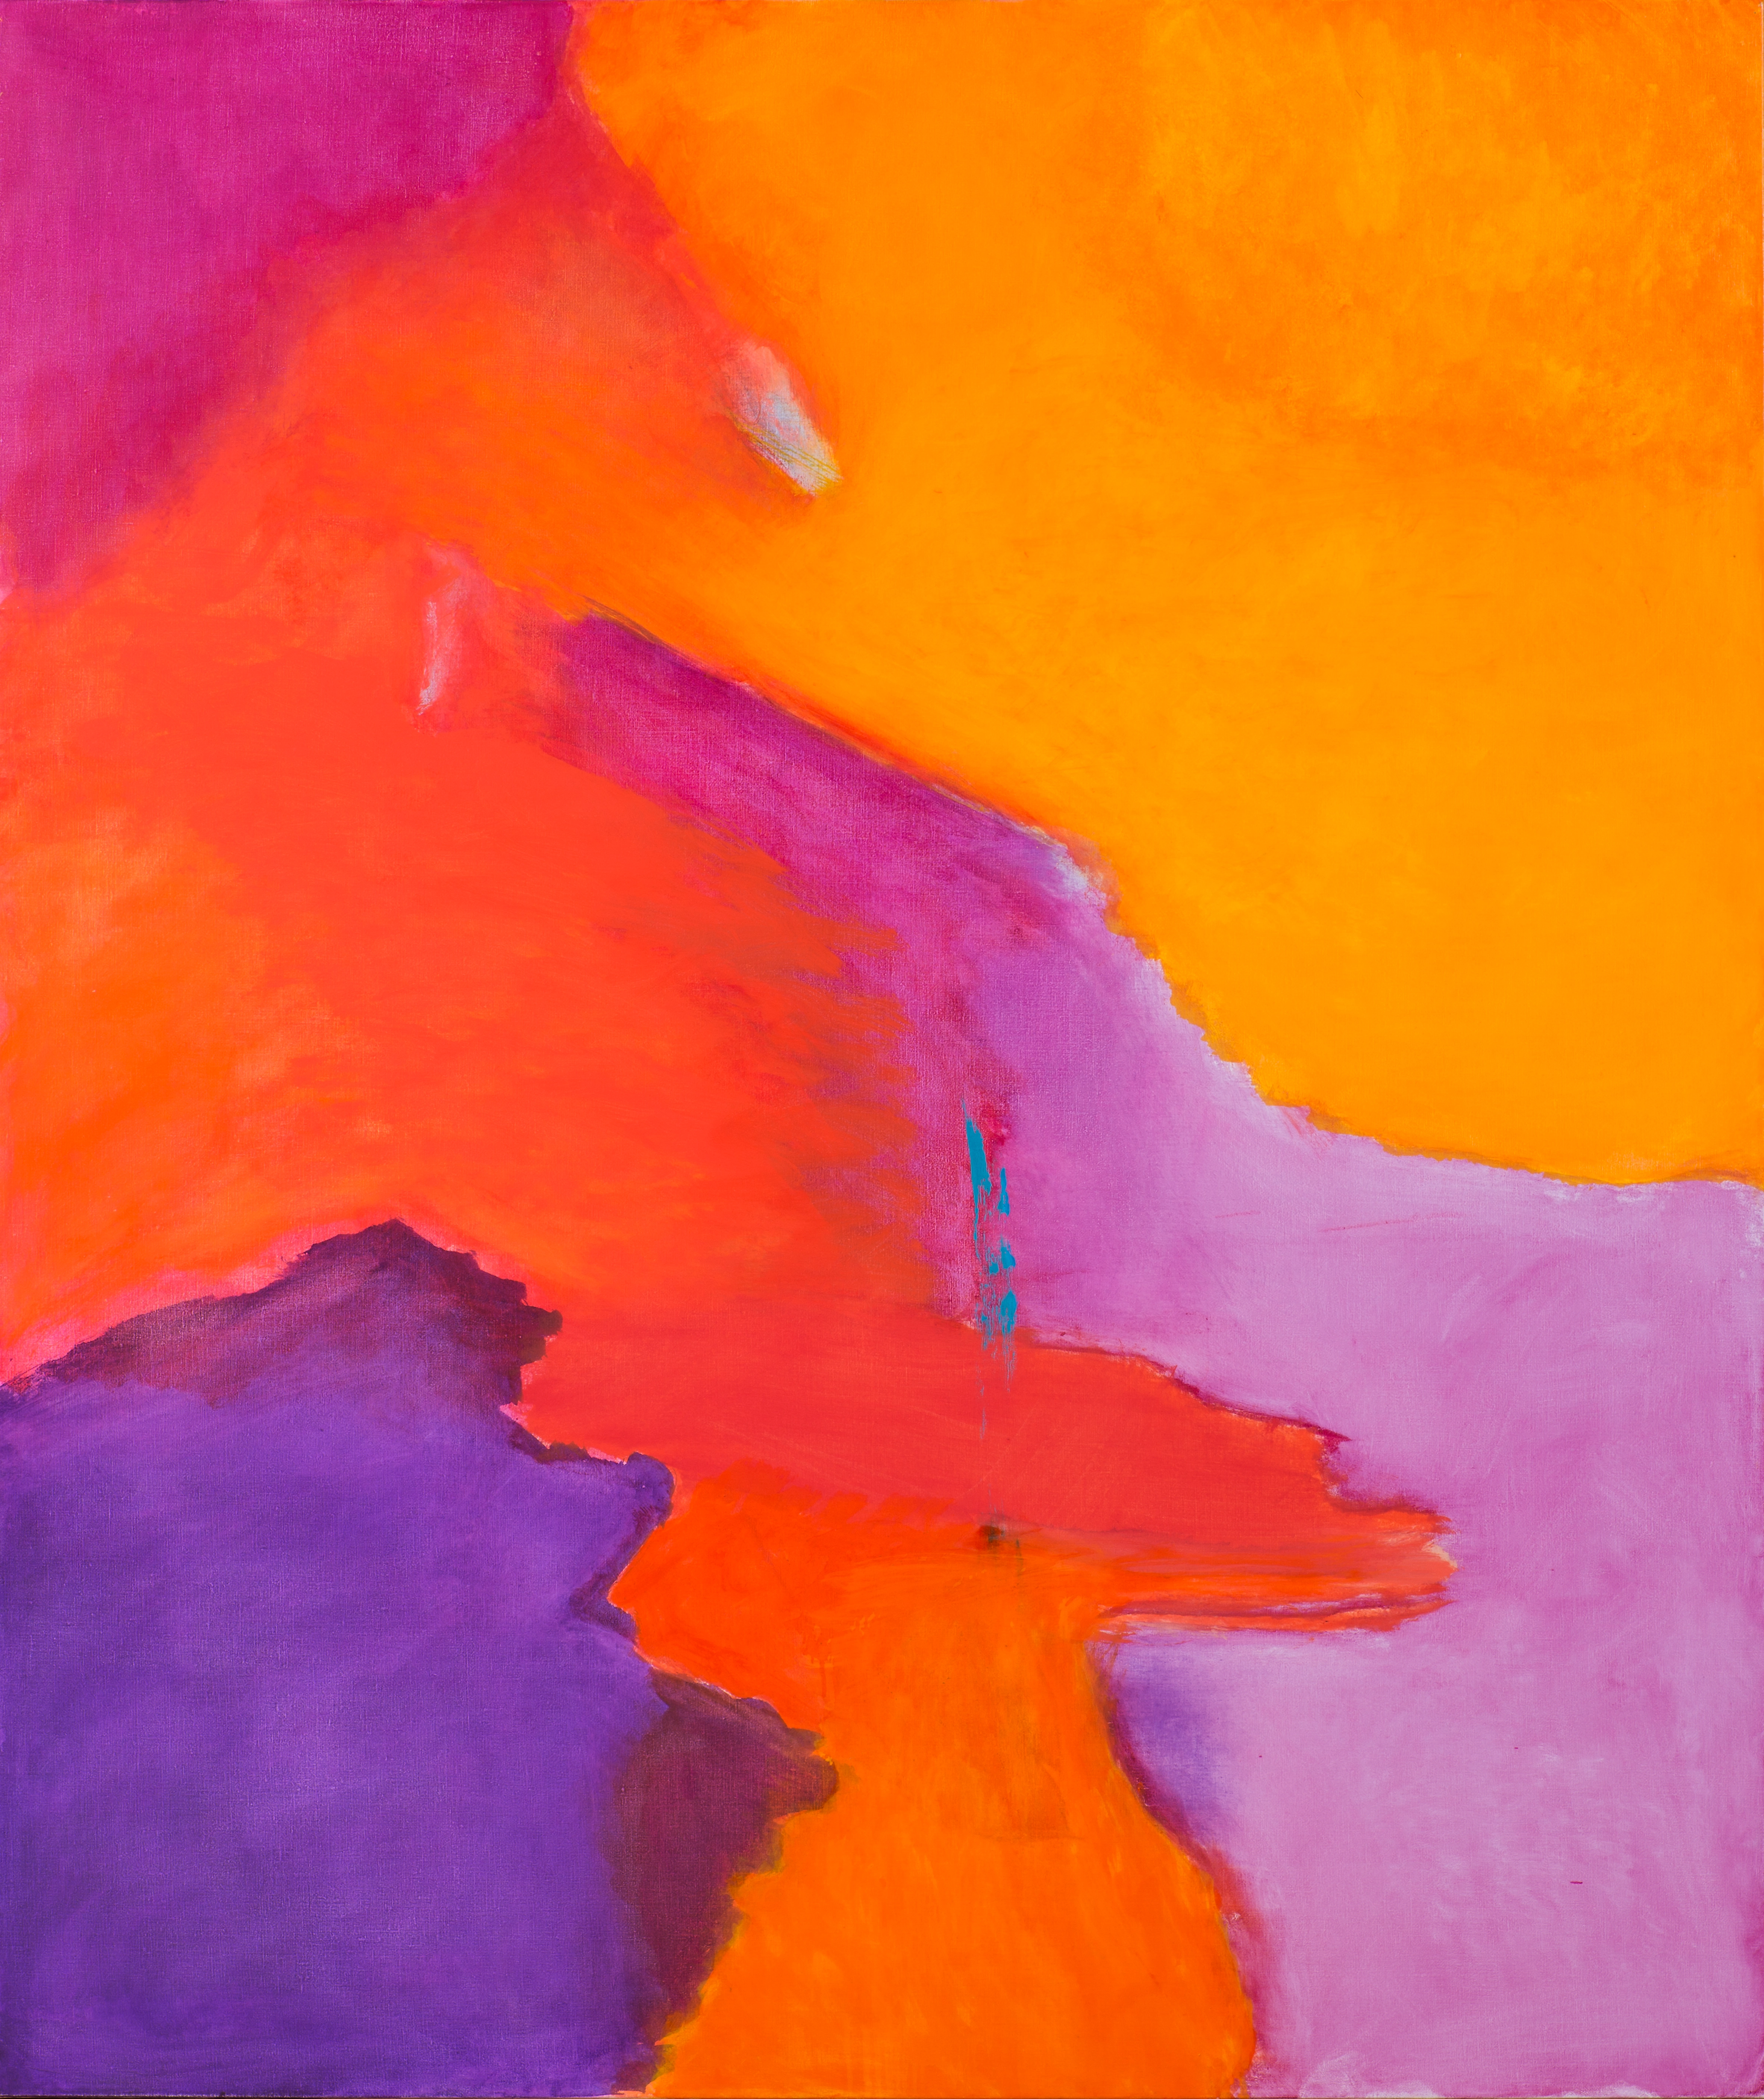 Abstract oil painting comprised of red, yellow, and varying hues of purple, ranging from lavender to blue-violet. Some areas between colors are blurred, while others have defined edges.